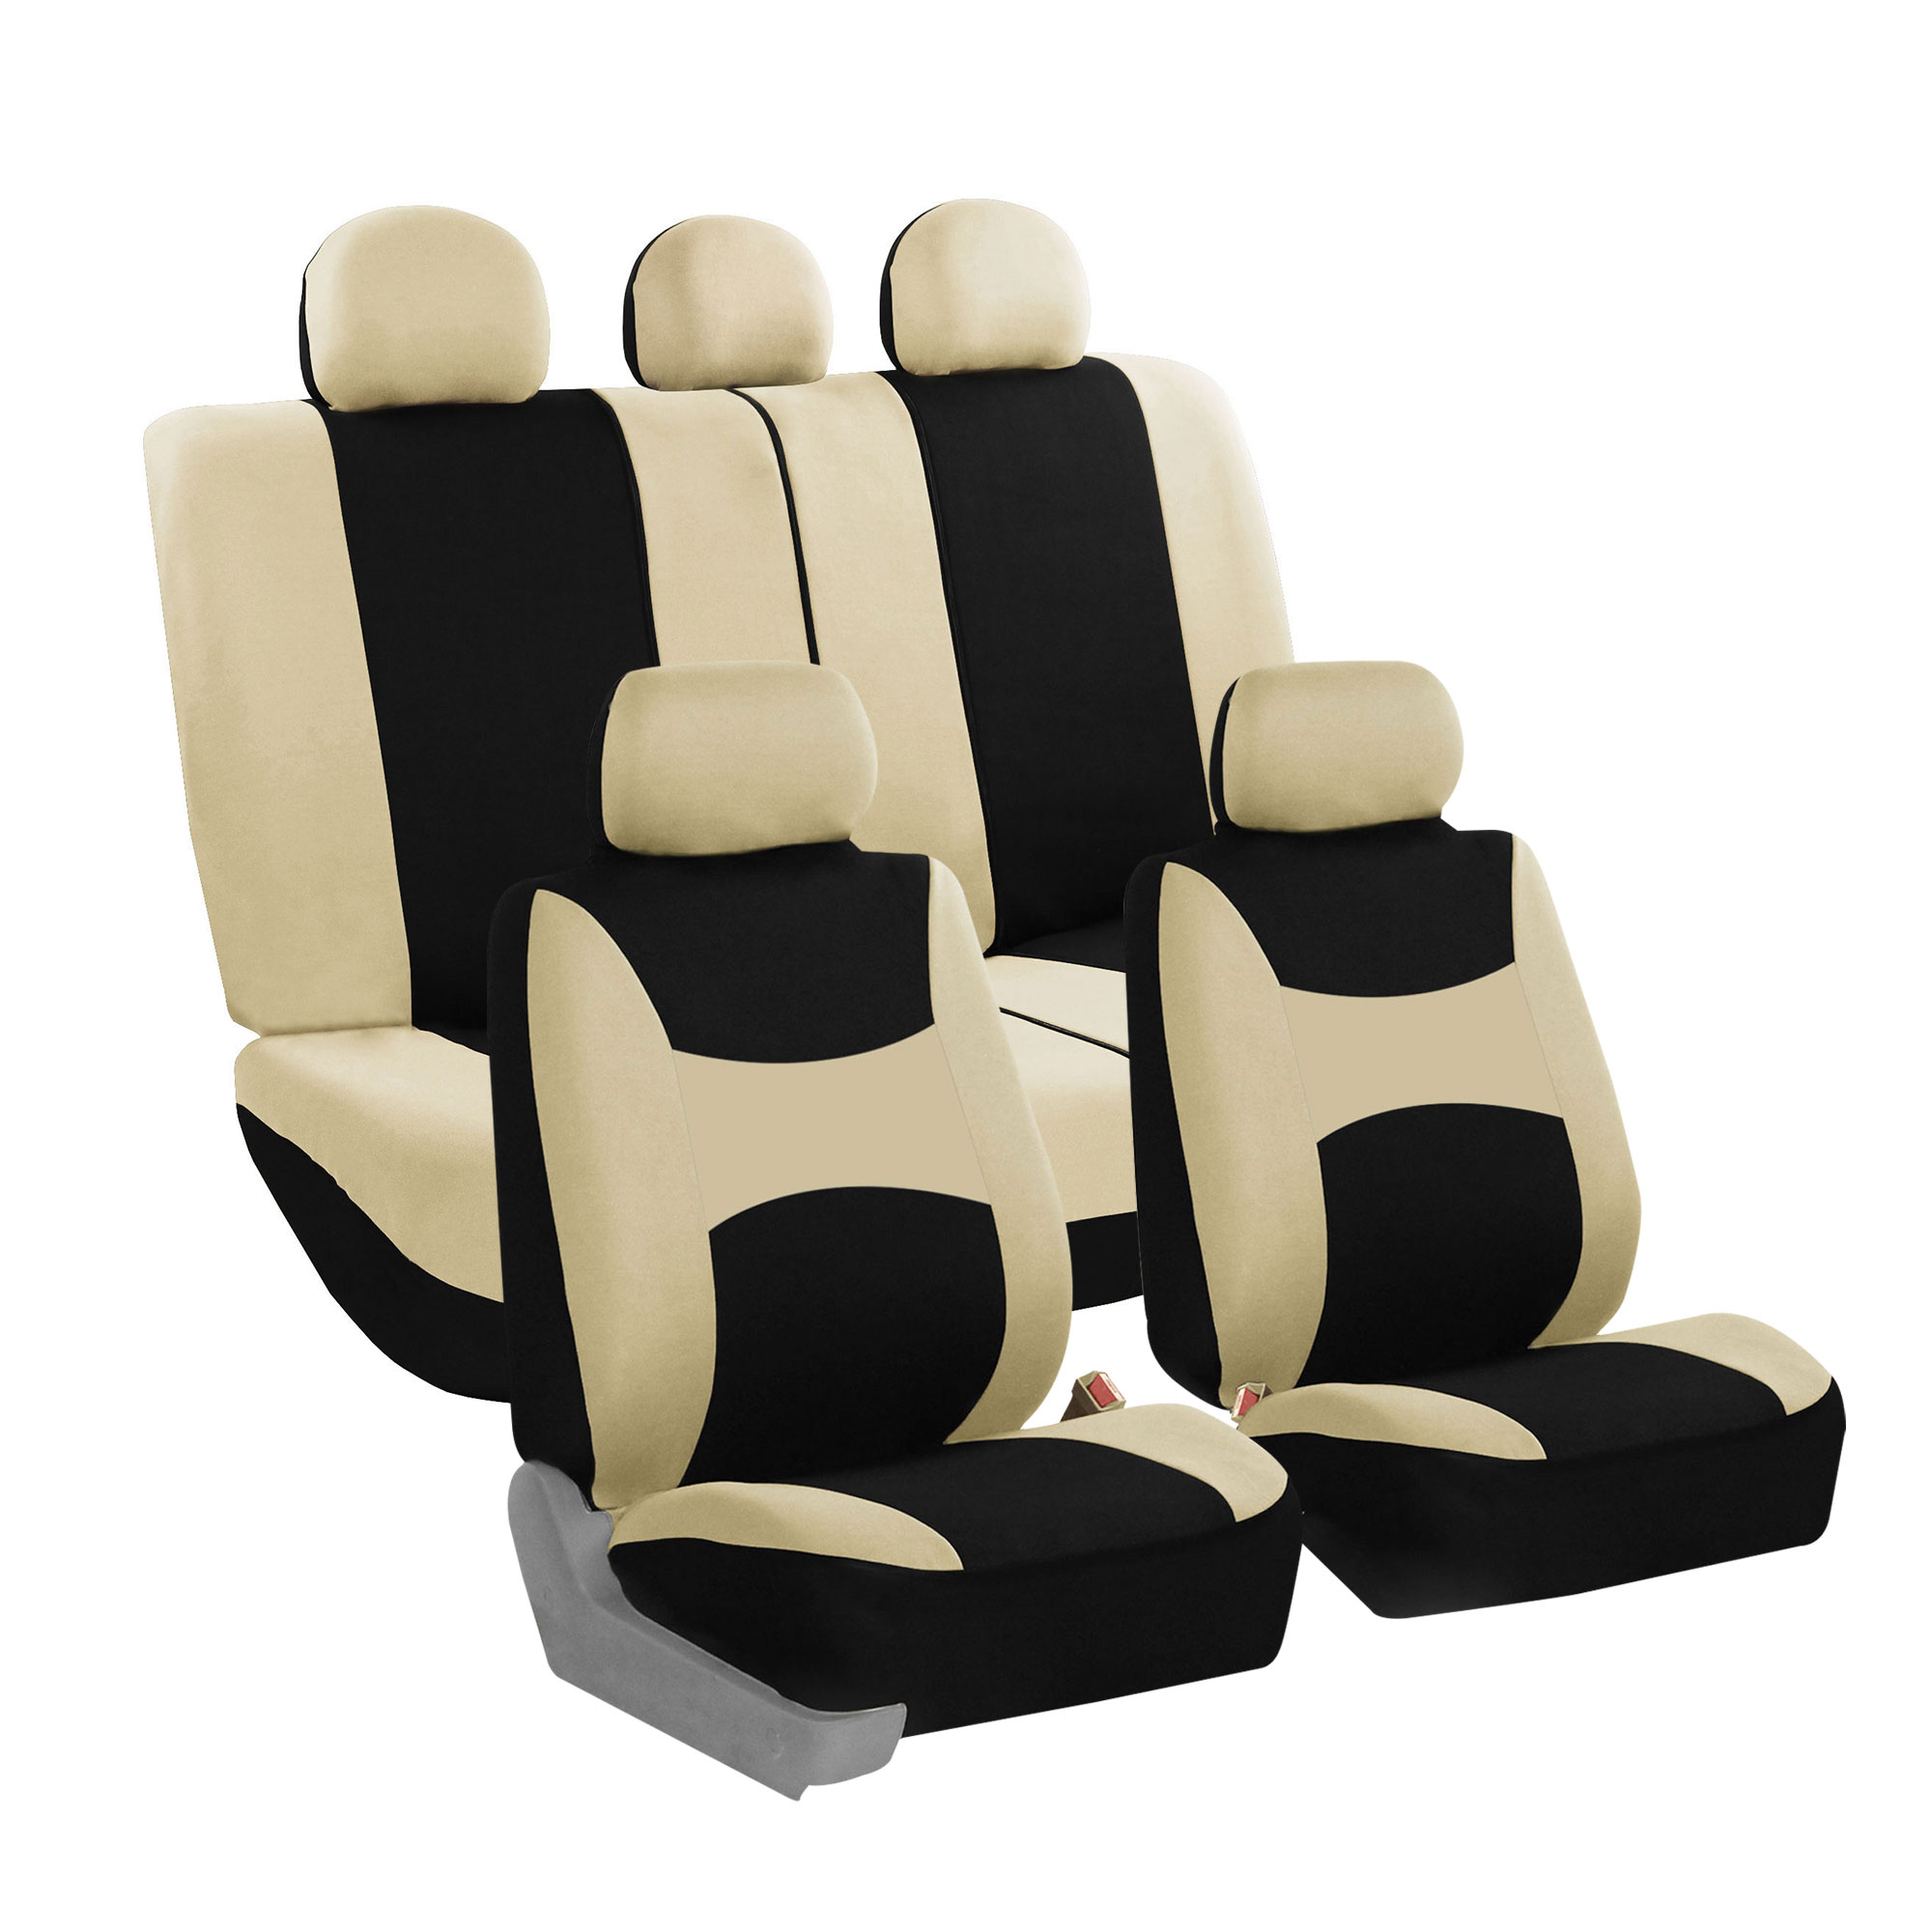 FH Group Auto Seat Cover For Car Truck SUV Van w/ Steering Cover Belt Pads Beige